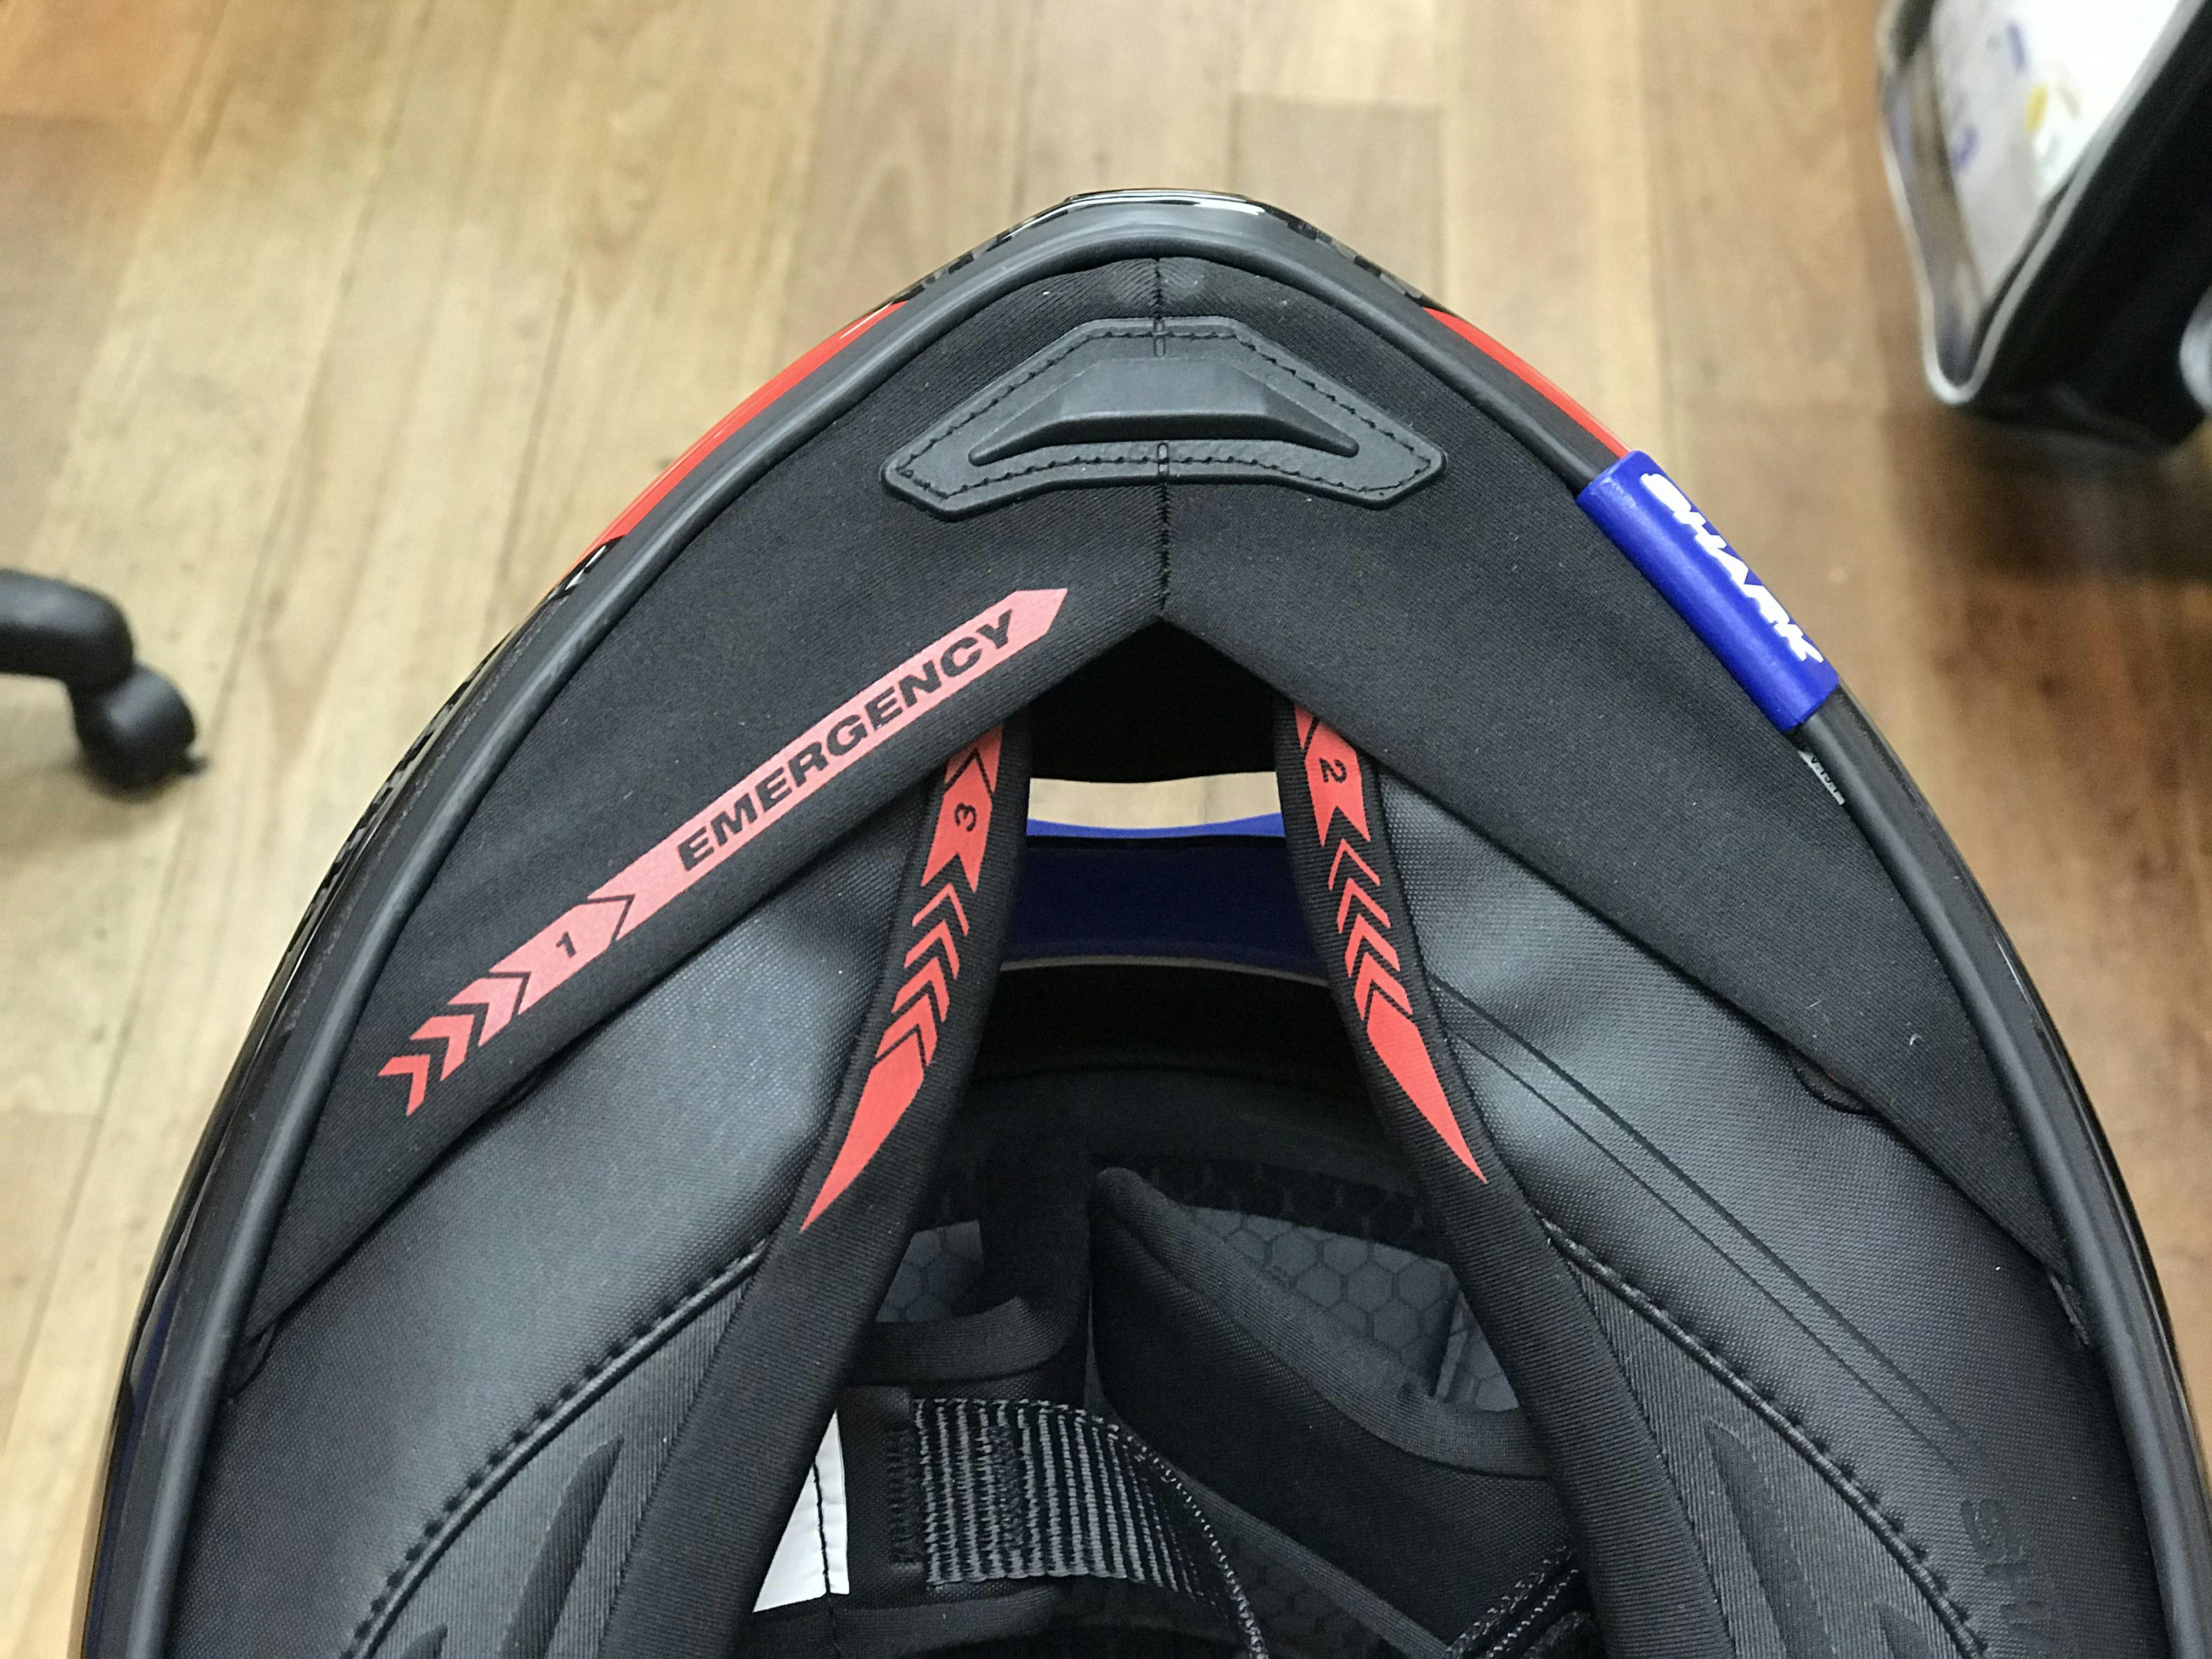 The new Shark Emergency Removal System on the Shark Carbon Spartan GT